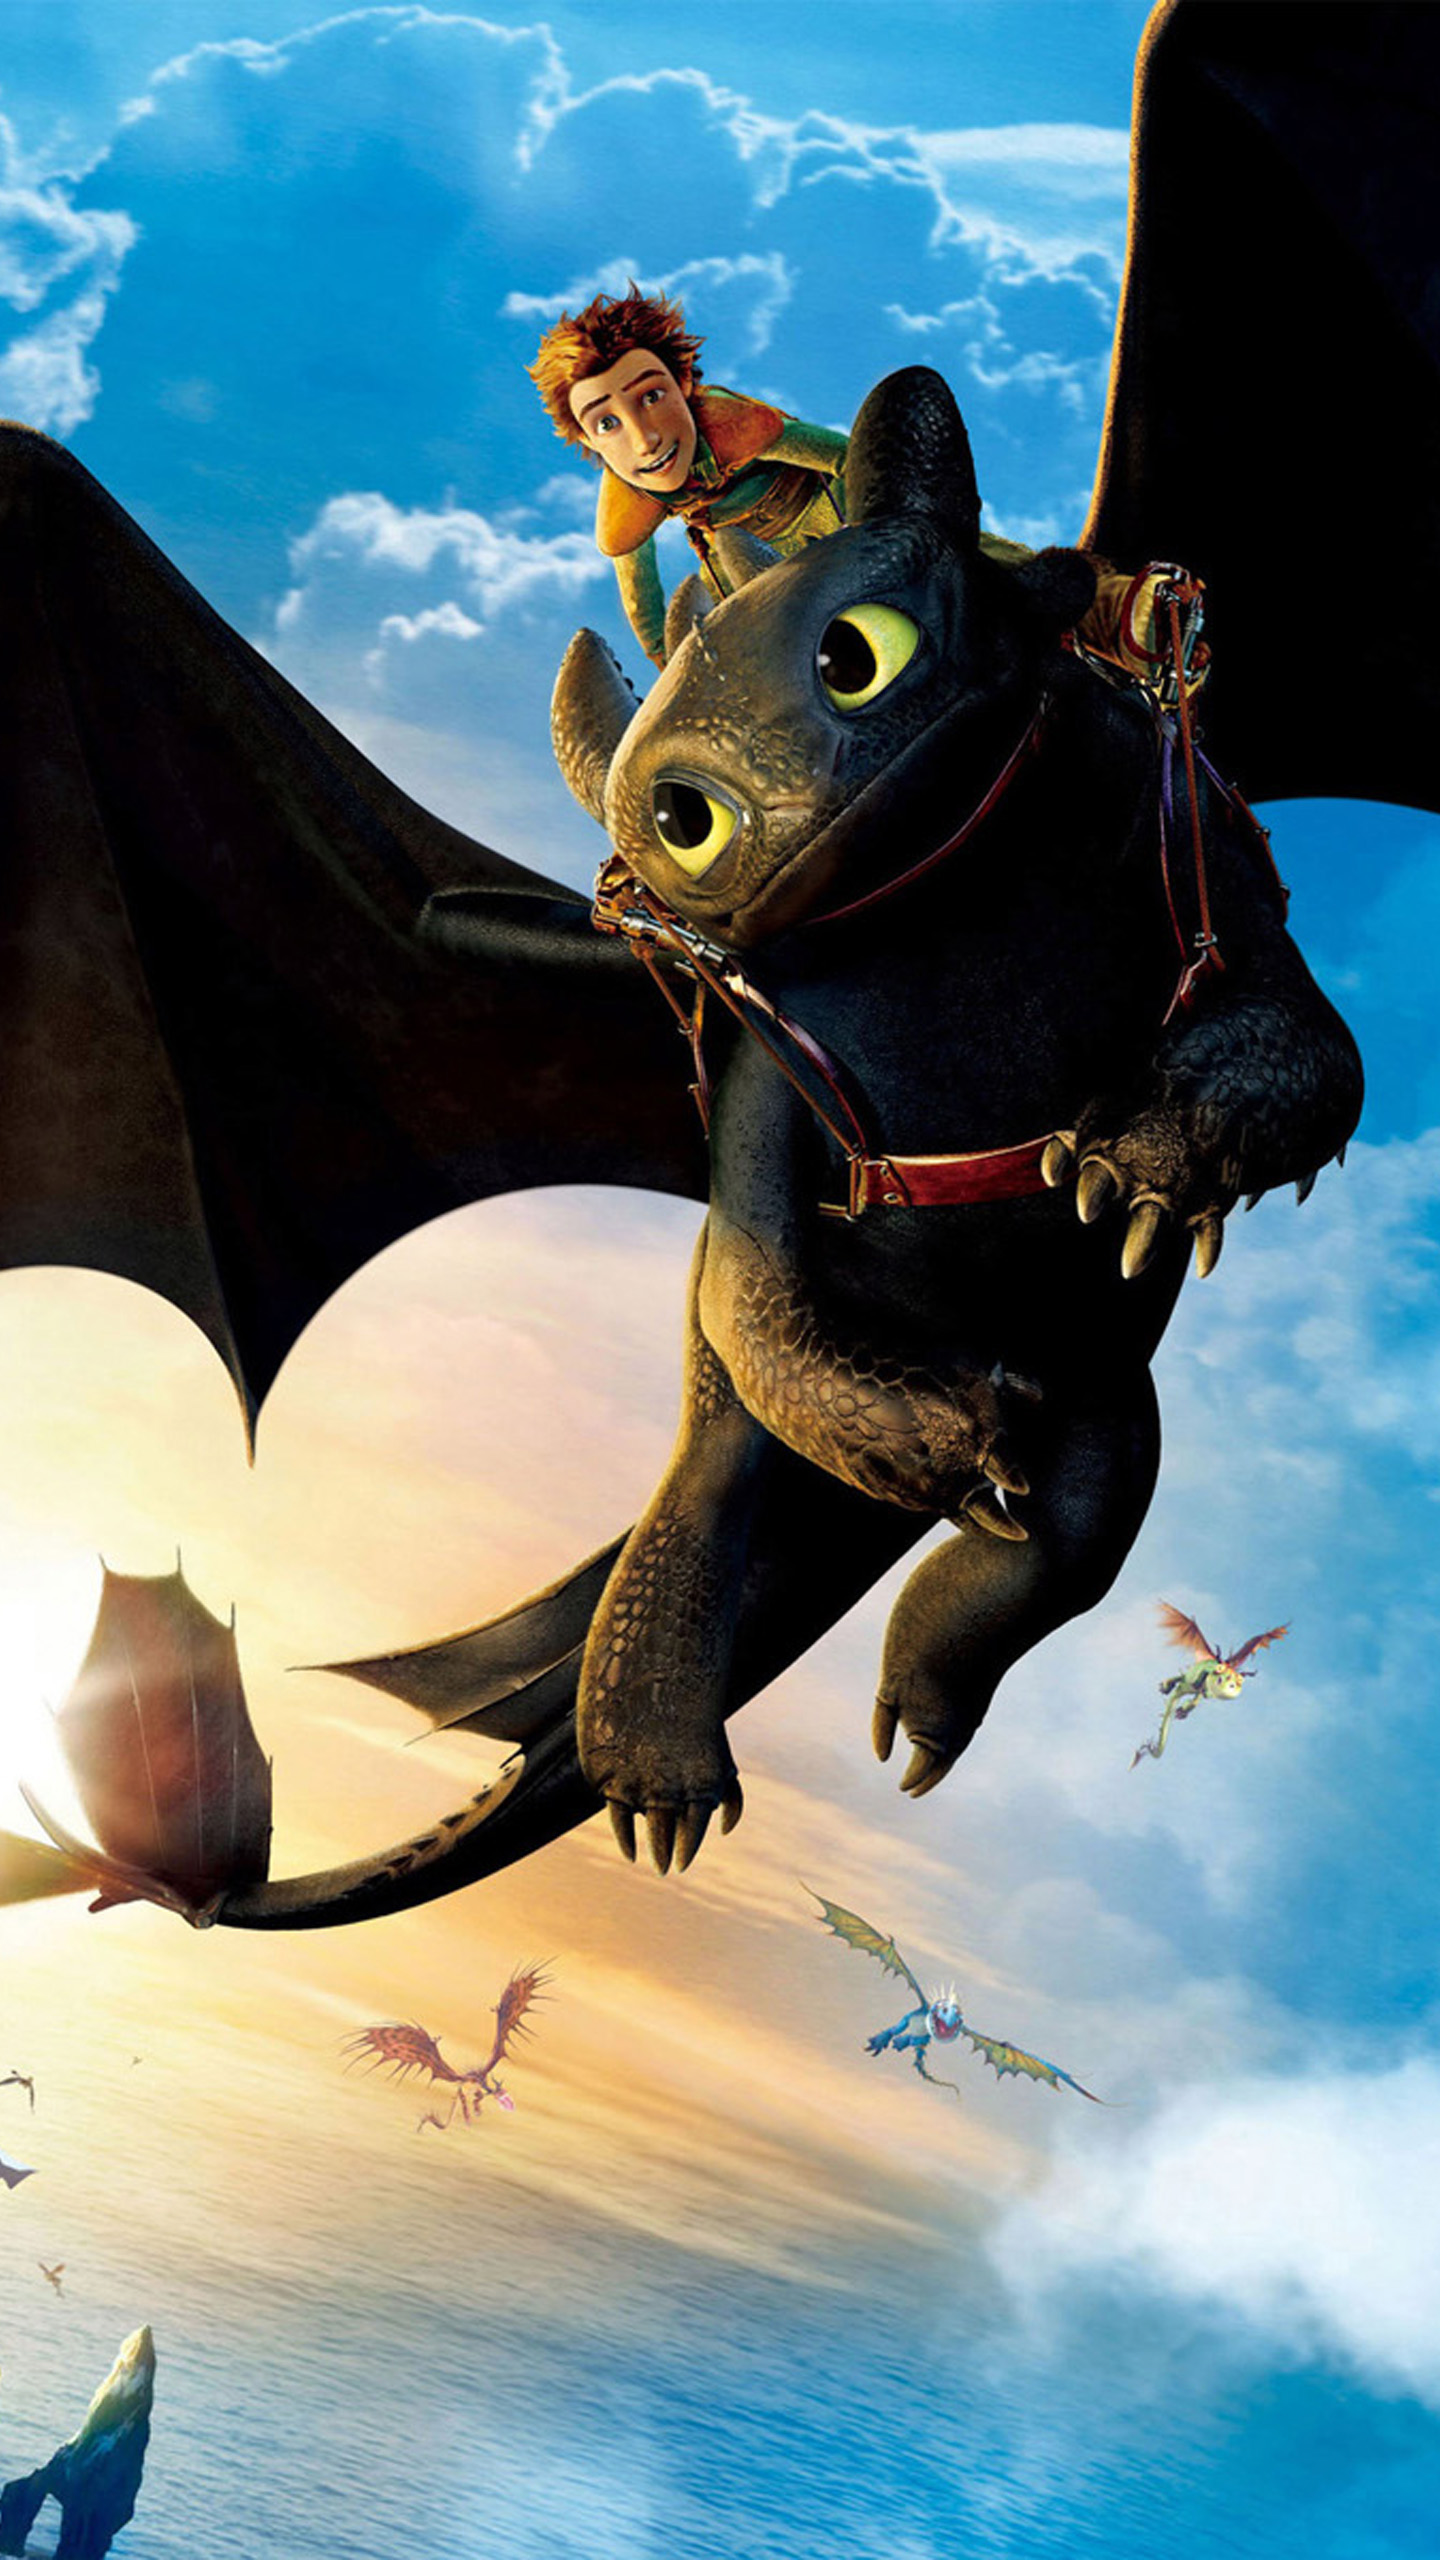 How To Train Your Dragon Galaxy S6 Wallpaper